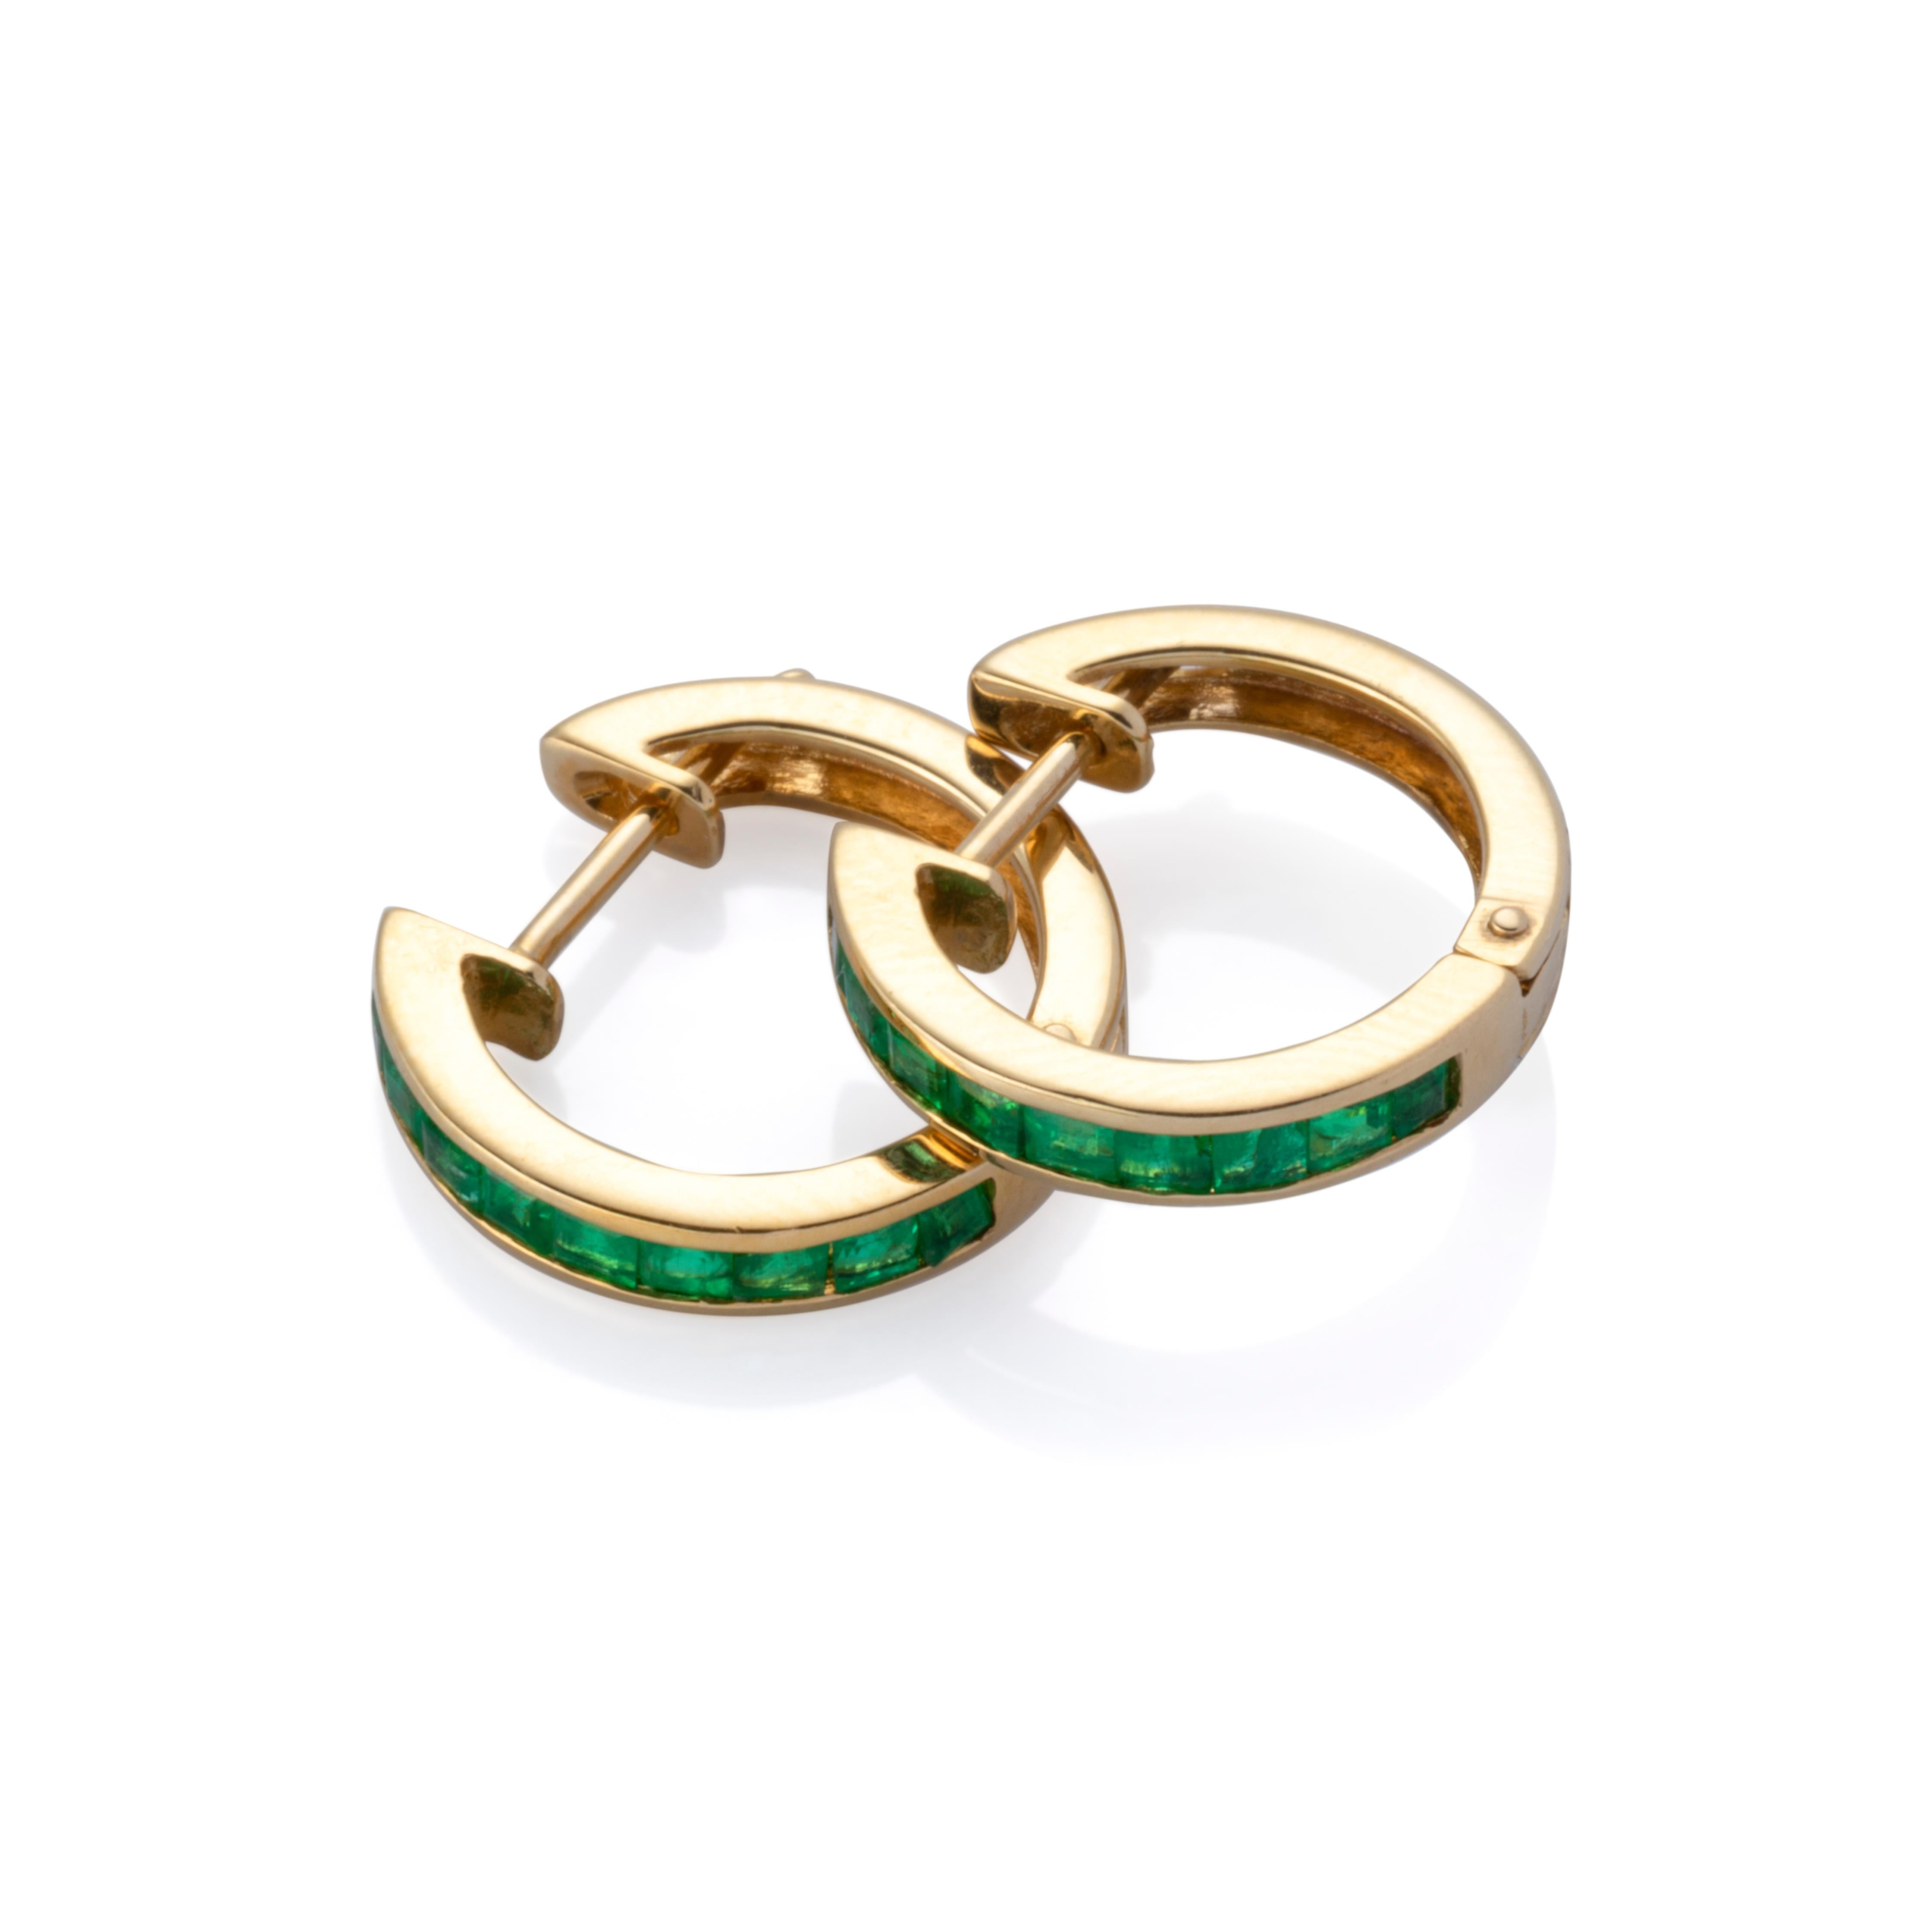 Auction Estimate:
$600 - $1,000

Beautiful hoop earrings made in the early 2000s and that has never been worn. The earrings have the unique shape of a hoop omega and is intricately designed. There are 18 squared bright green emeralds in total and